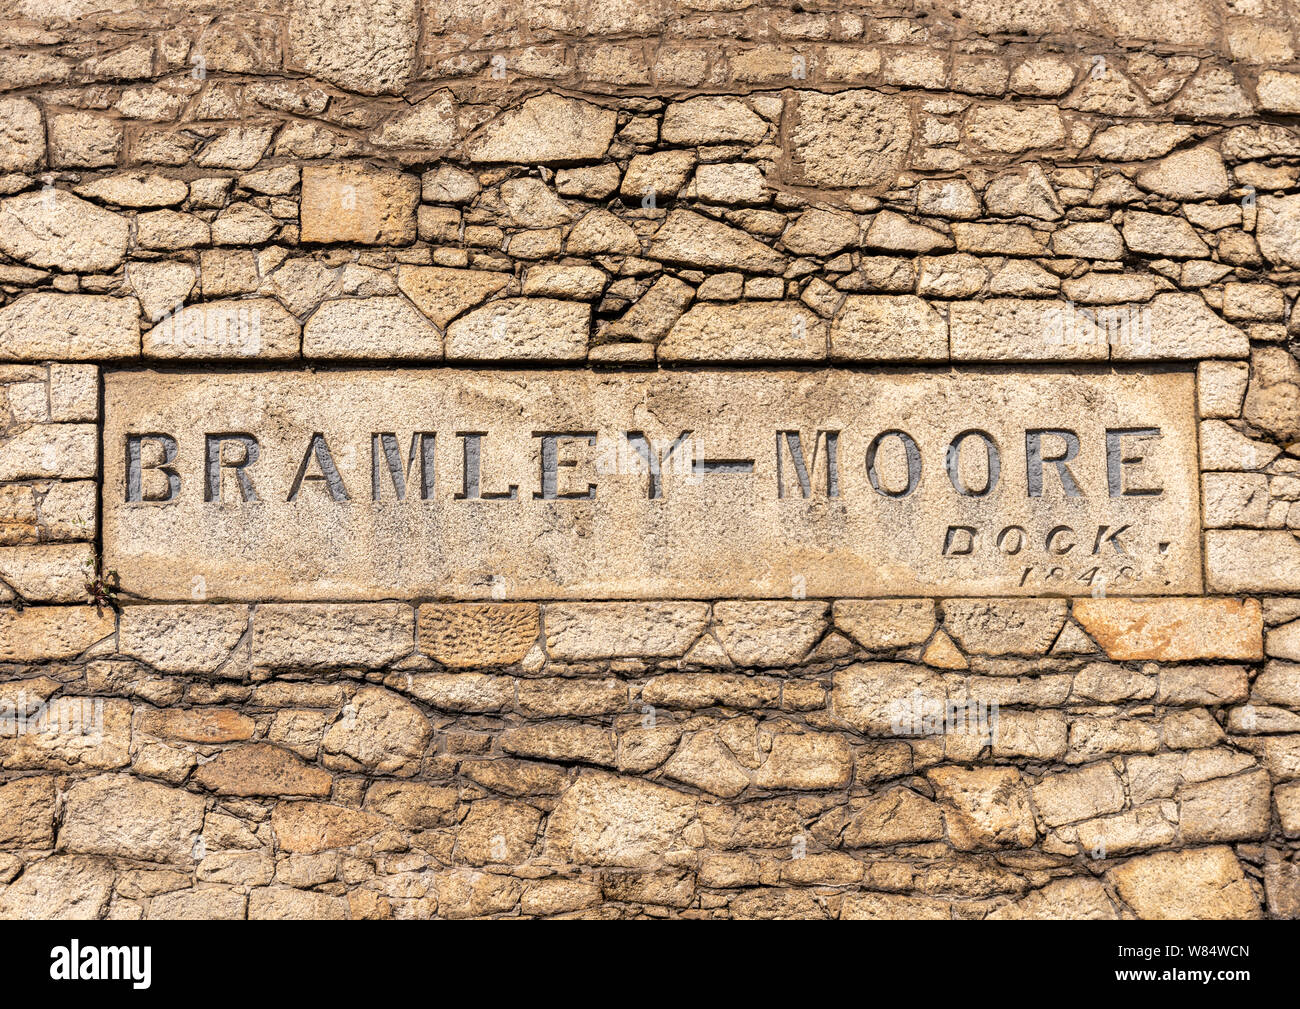 Bramley Moore Dock Liverpool, future home for the new Everton FC stadium Stock Photo